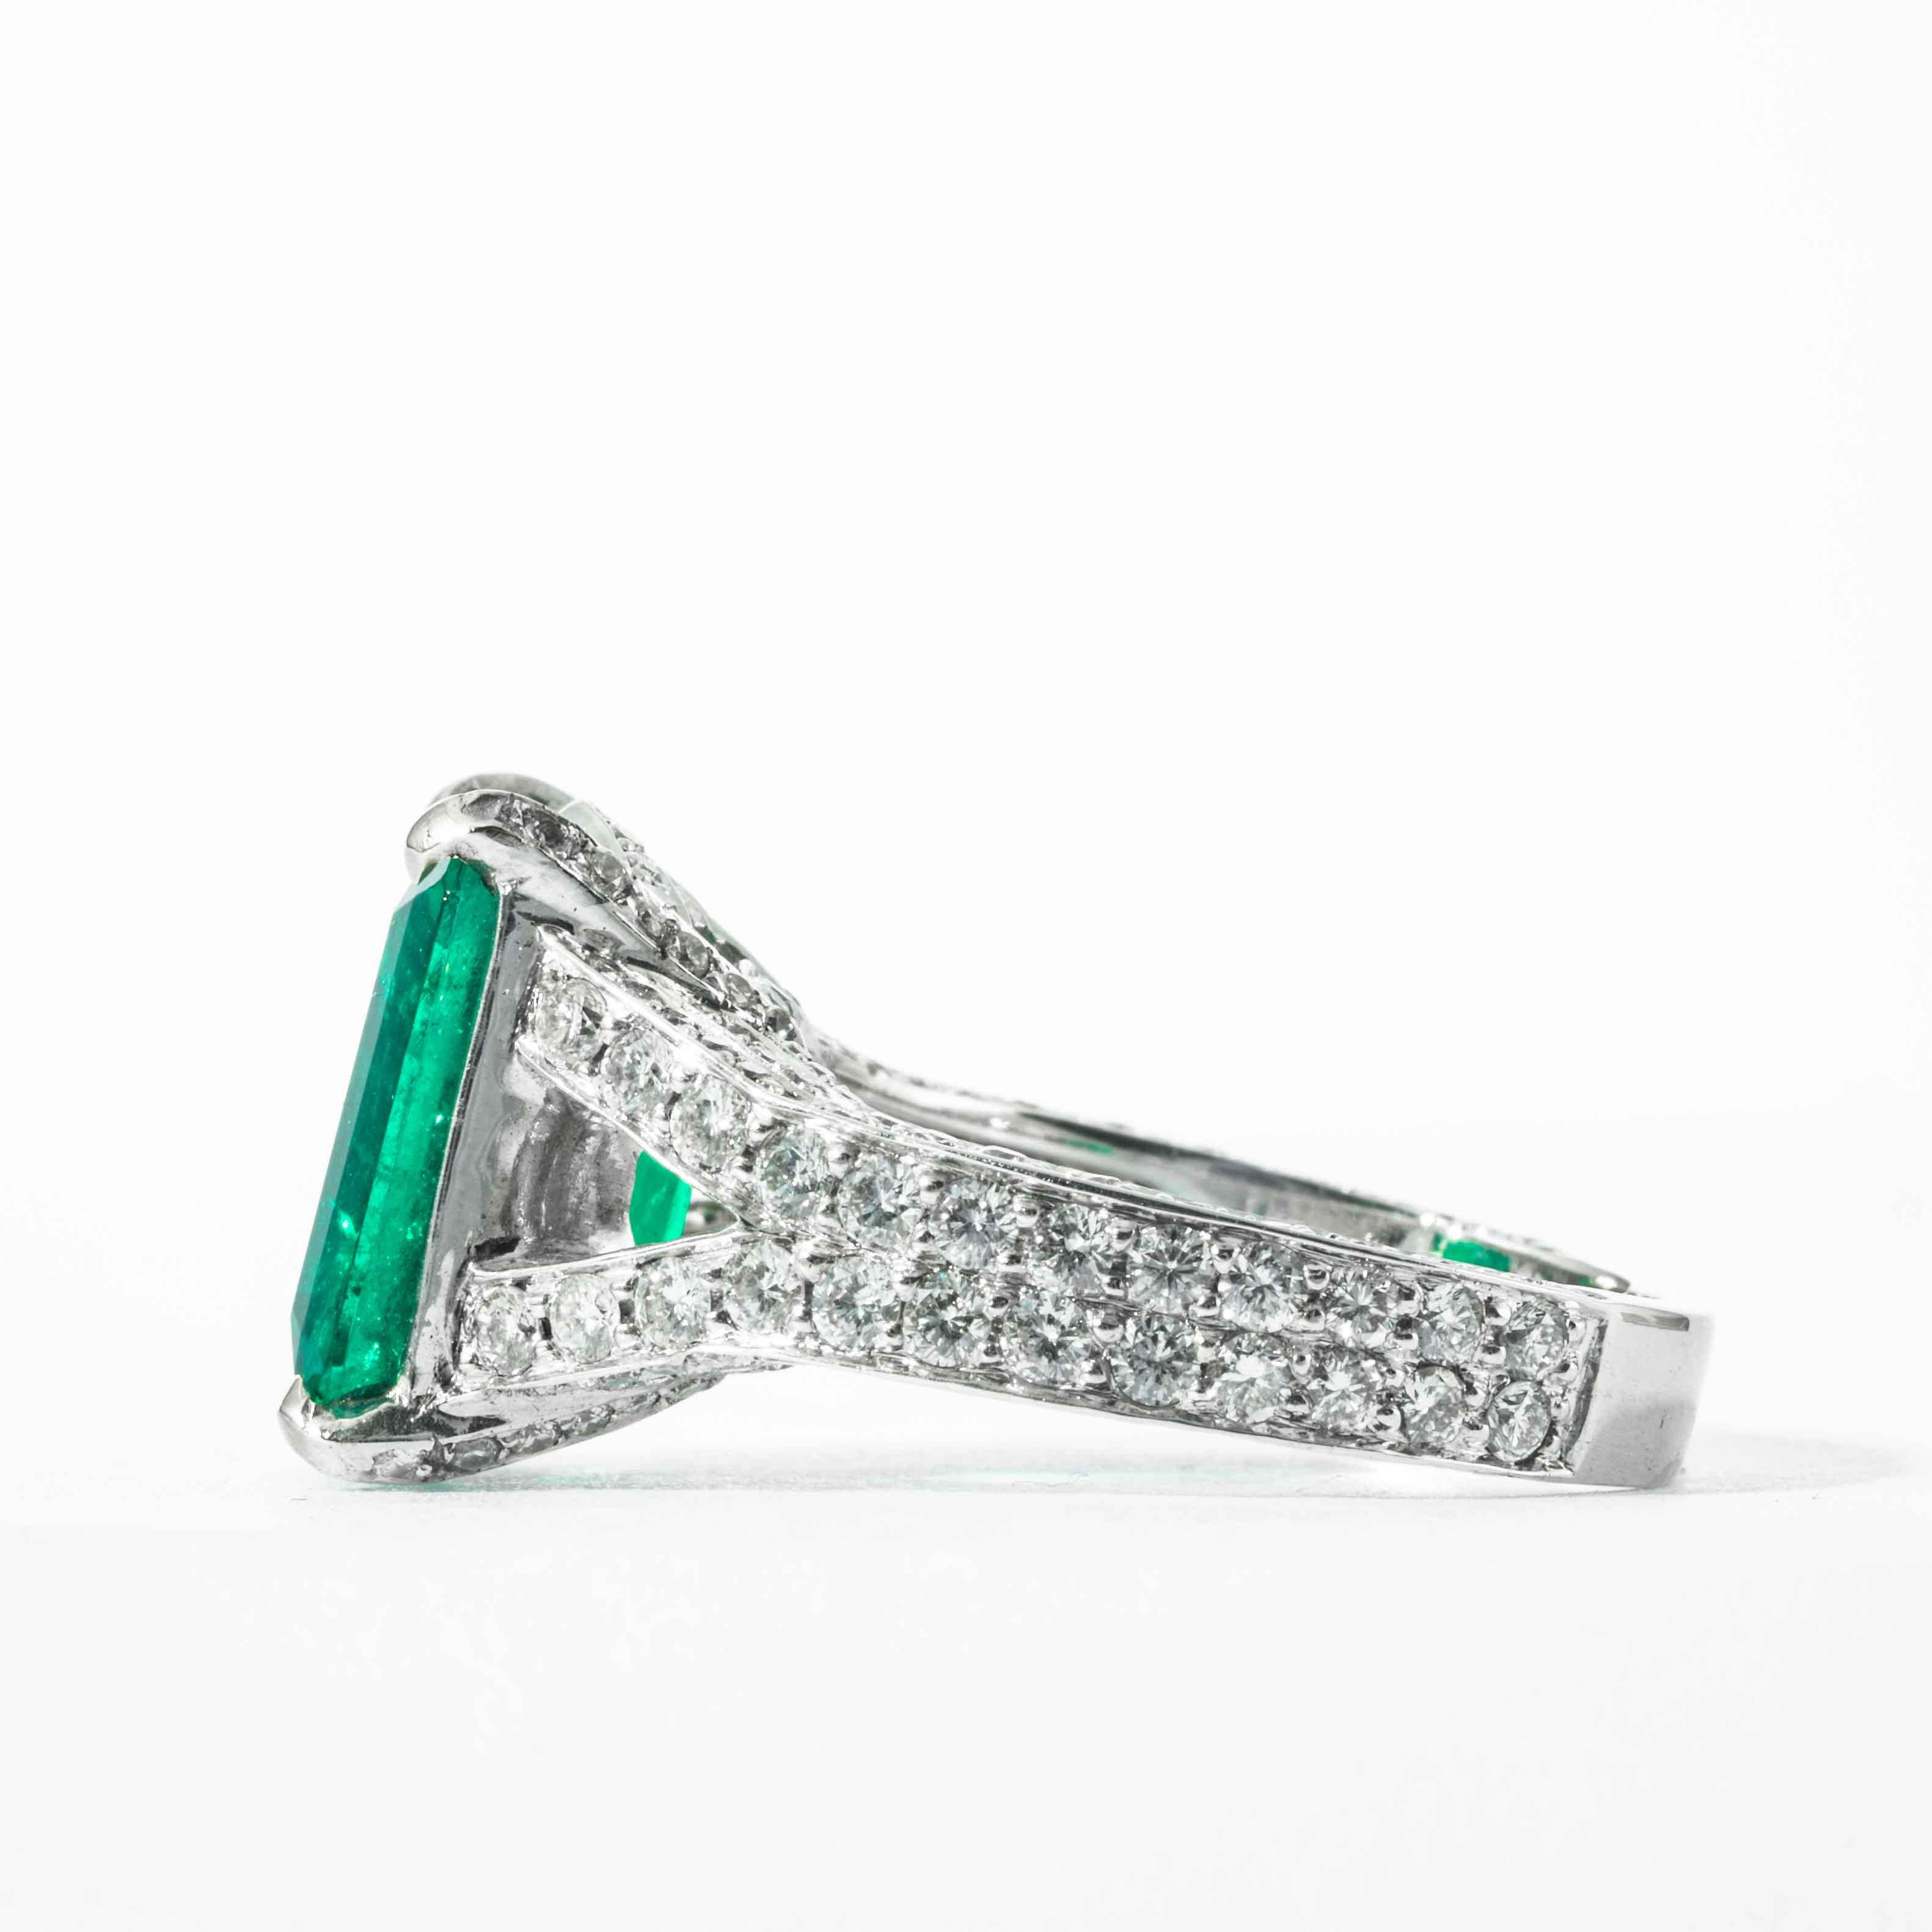 Shreve, Crump & Low 6.25 Carat Colombian Emerald and Diamond White Gold Ring For Sale 1